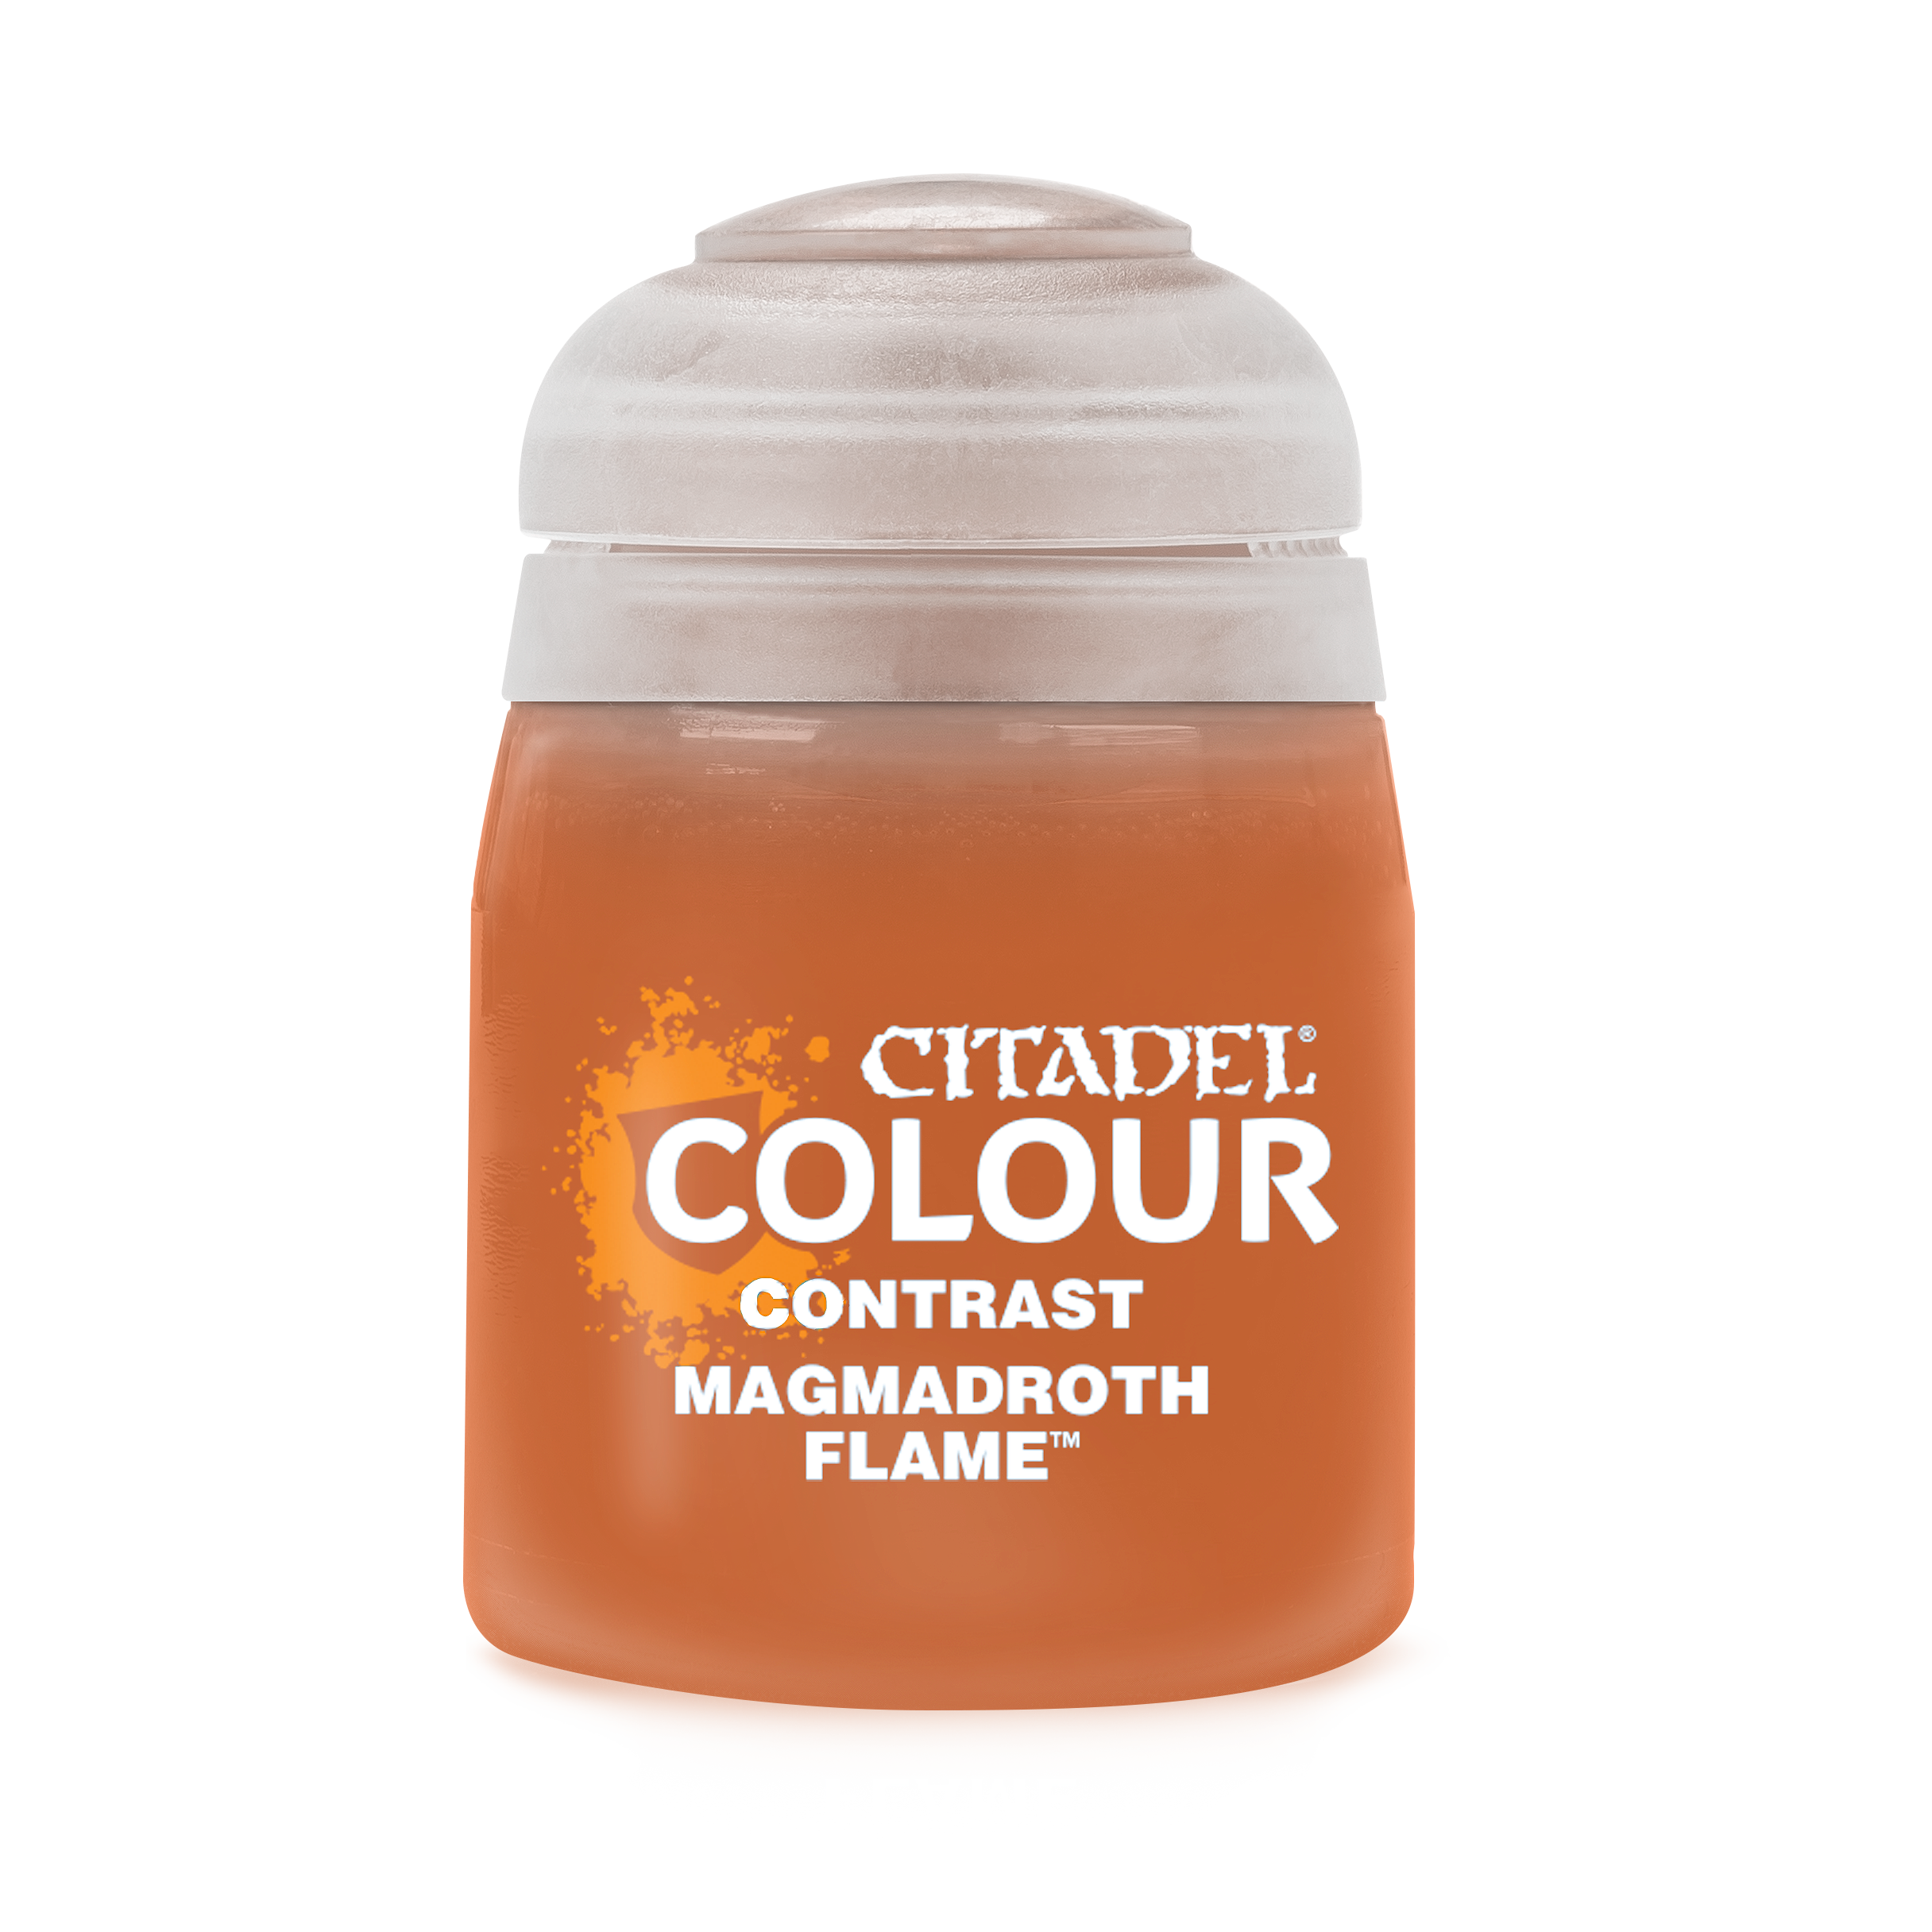 Citadel Contrast Magmadroth Flame